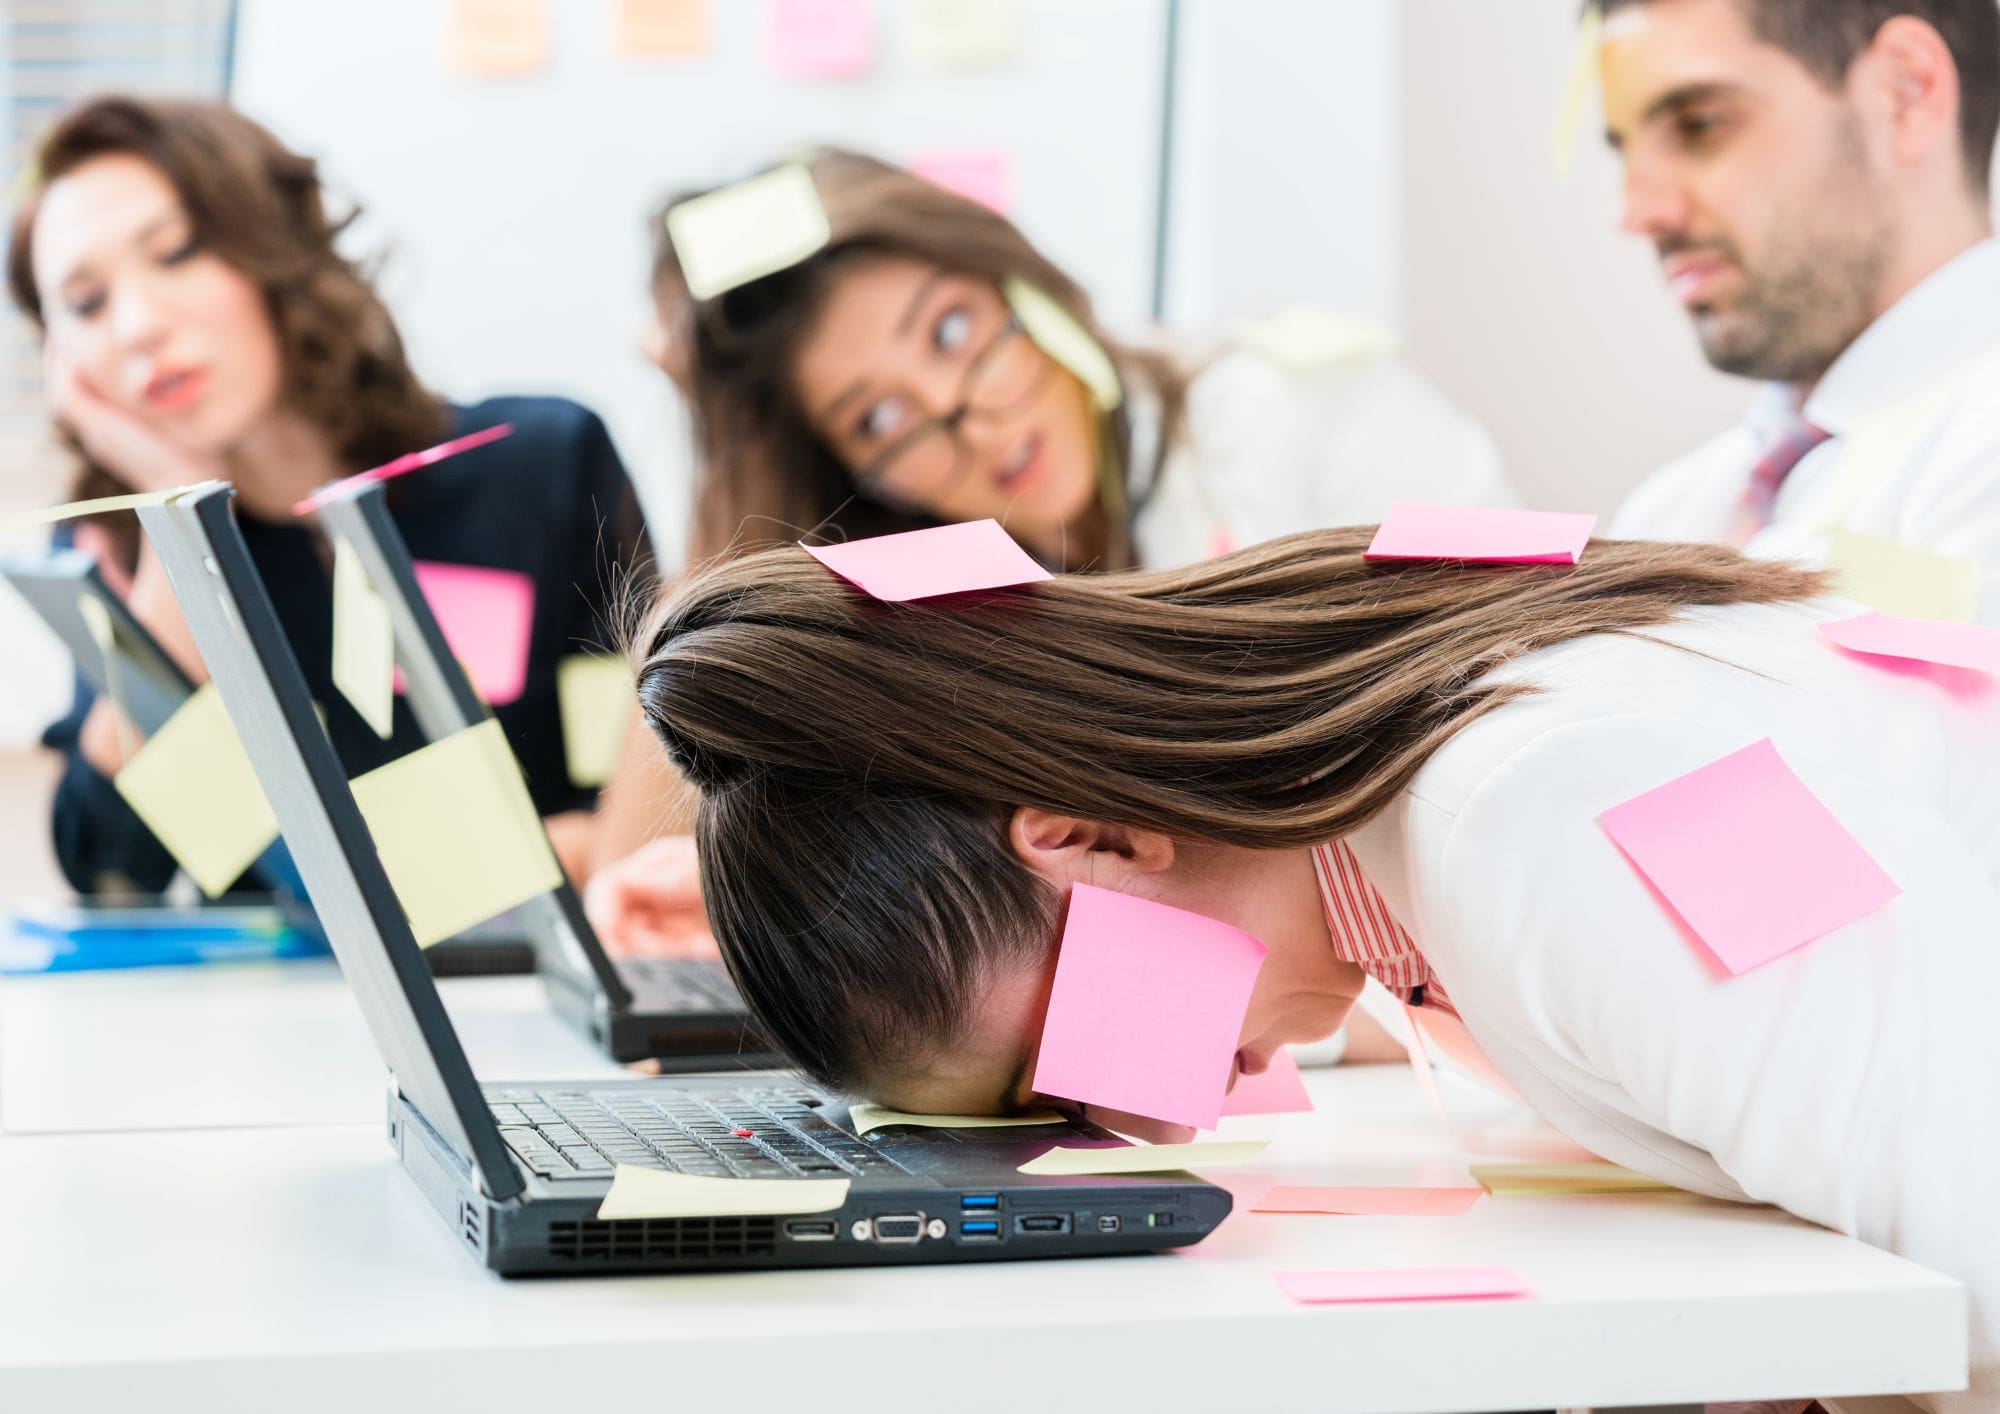 4 extremely stressed out business people, with a business woman covered in post-it notes and her head on the laptop on the desk.